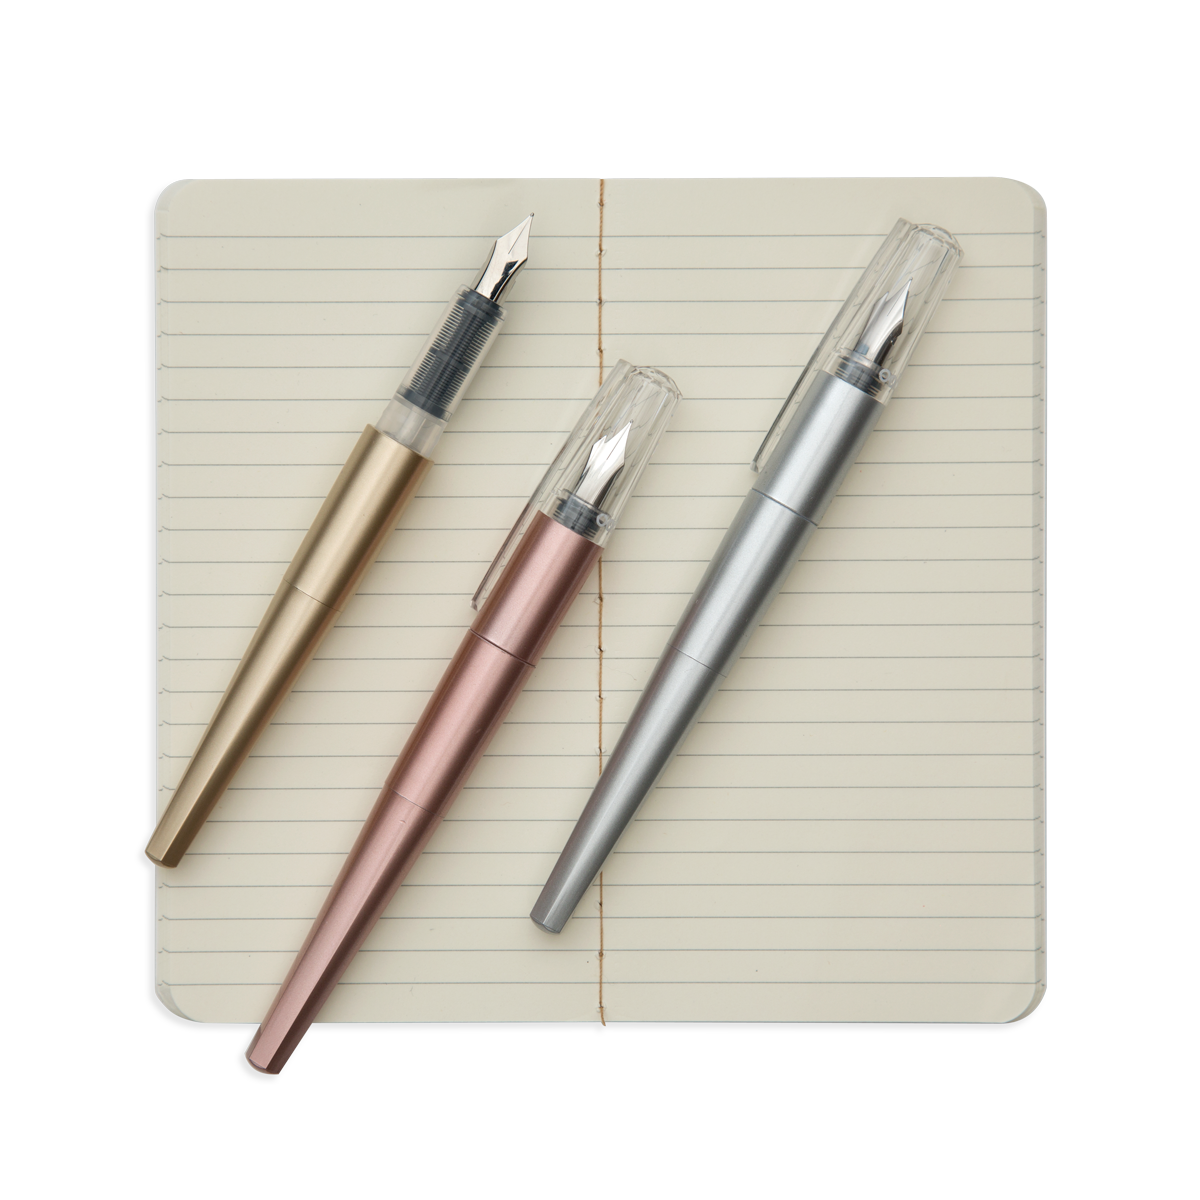 Ooly Fab Fountain Pen S/4 – Lee's Paperie